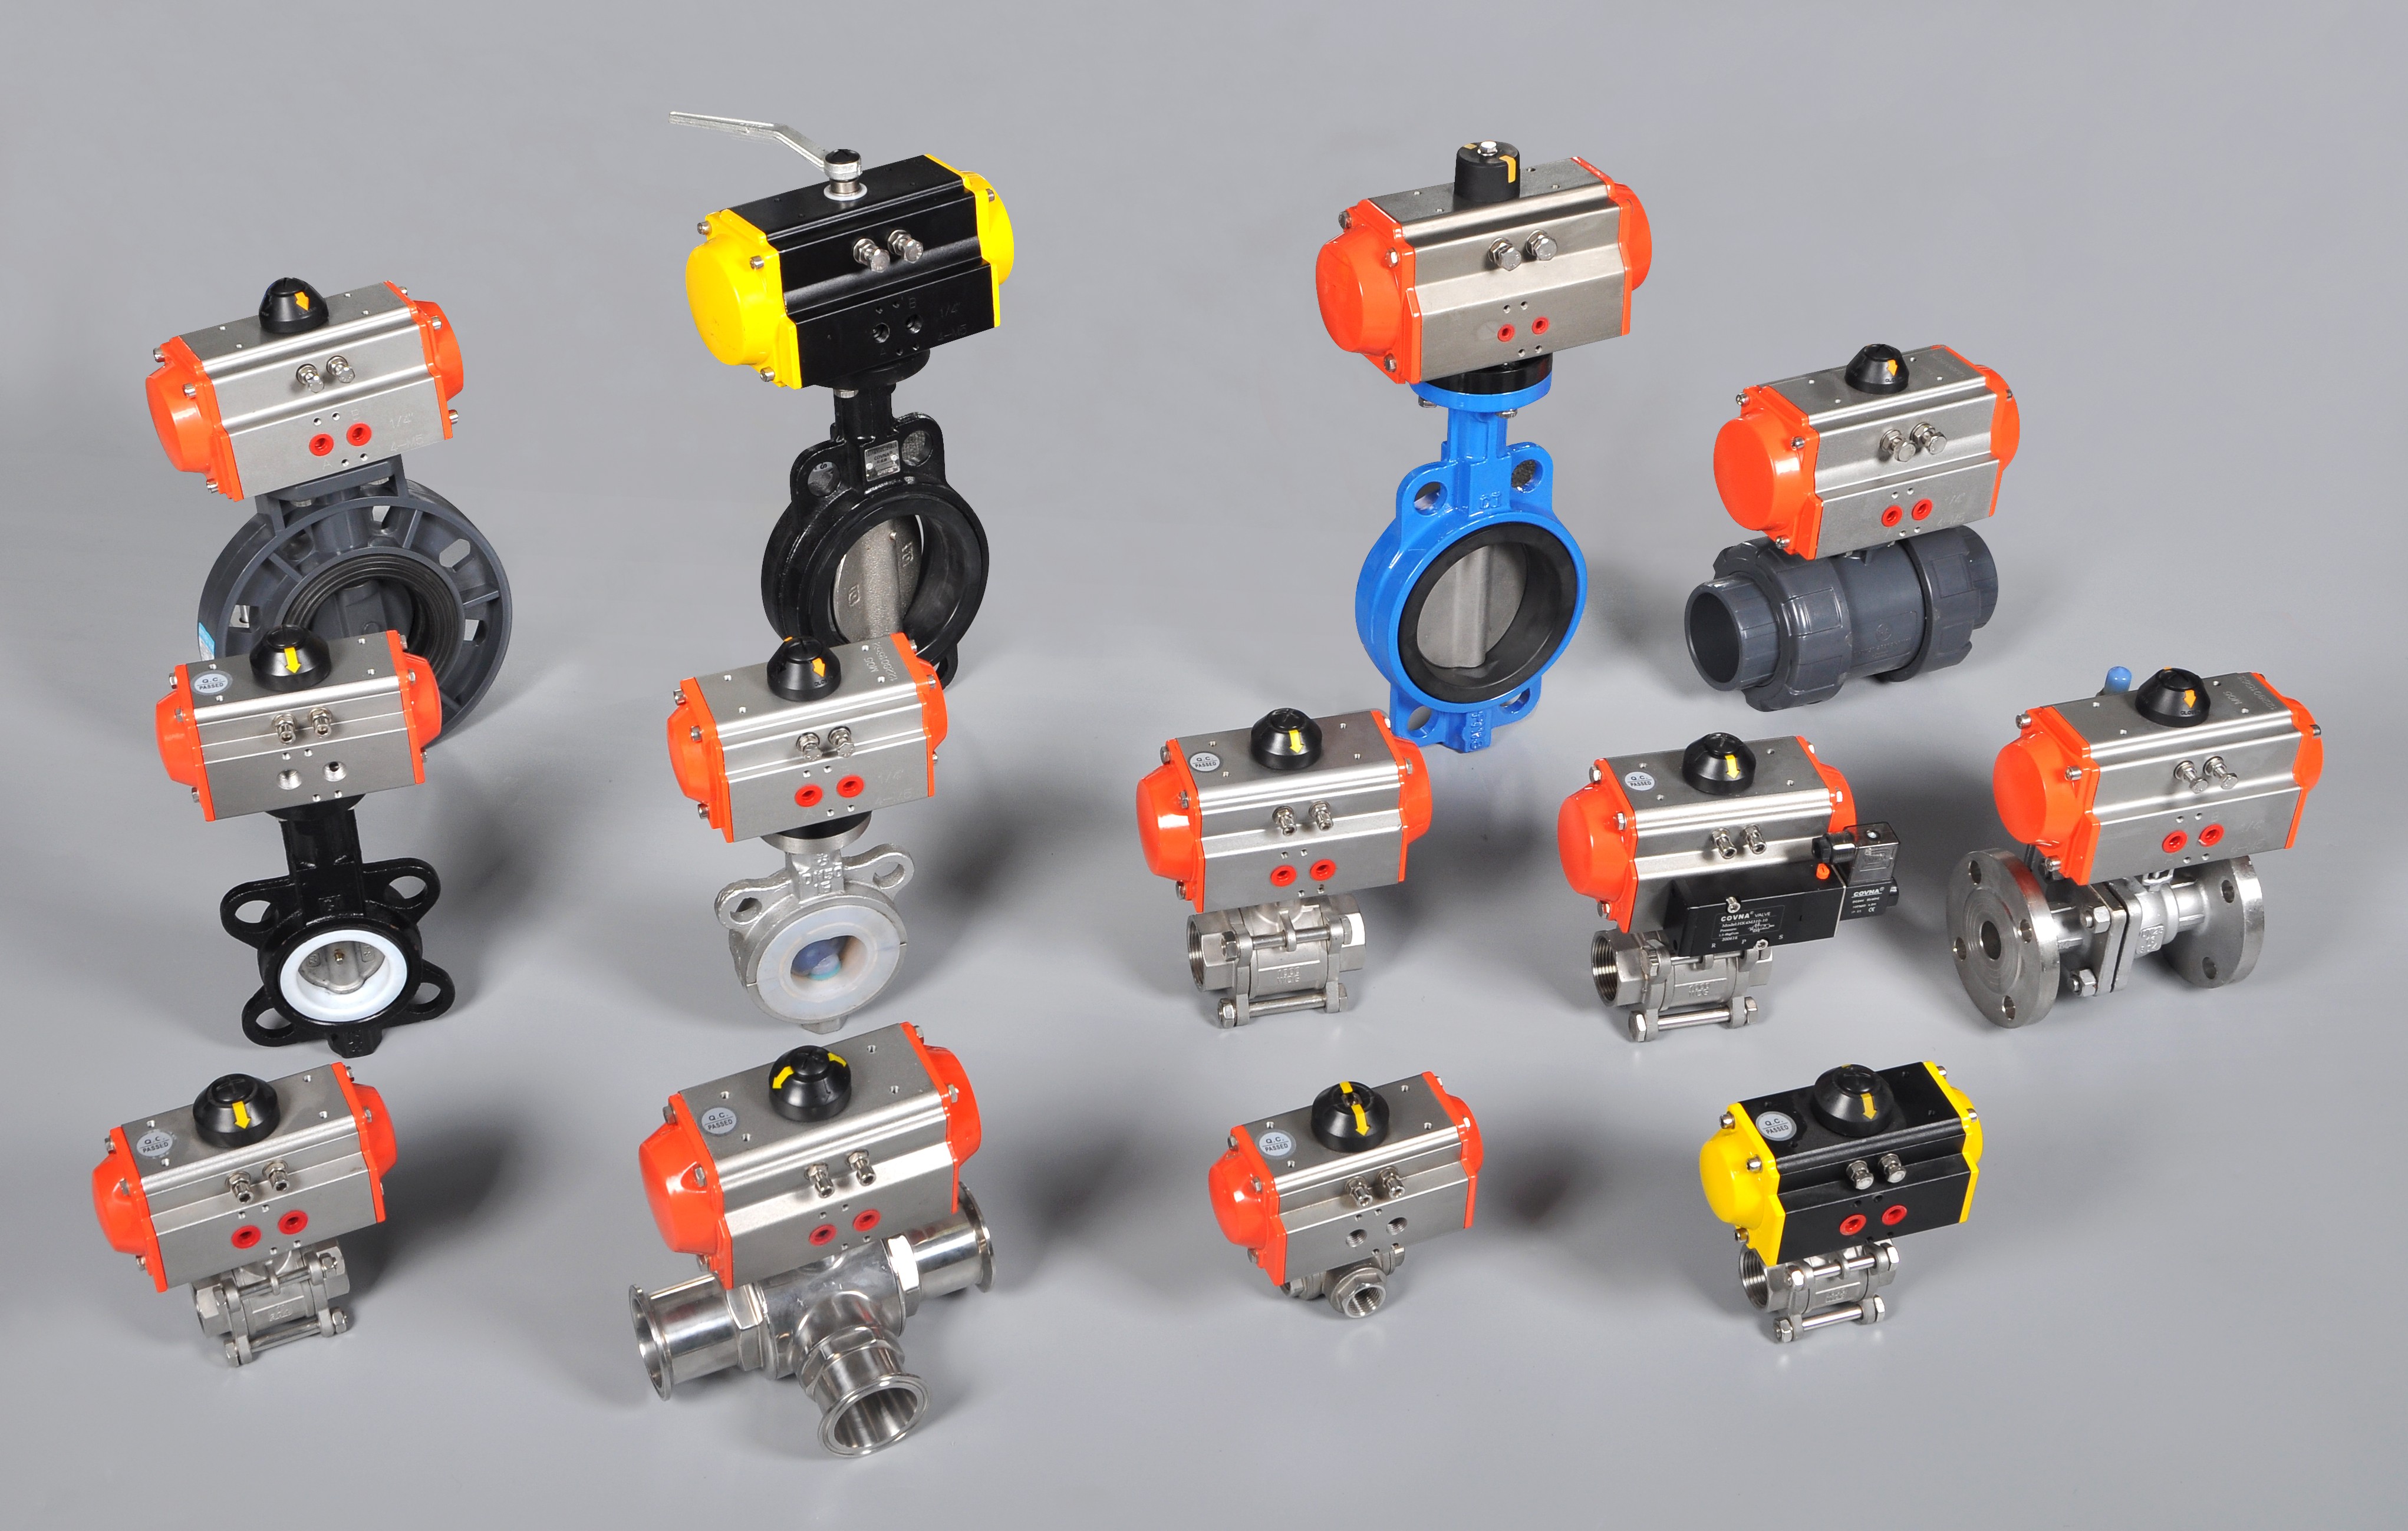 How to choose the right pneumatic valves?